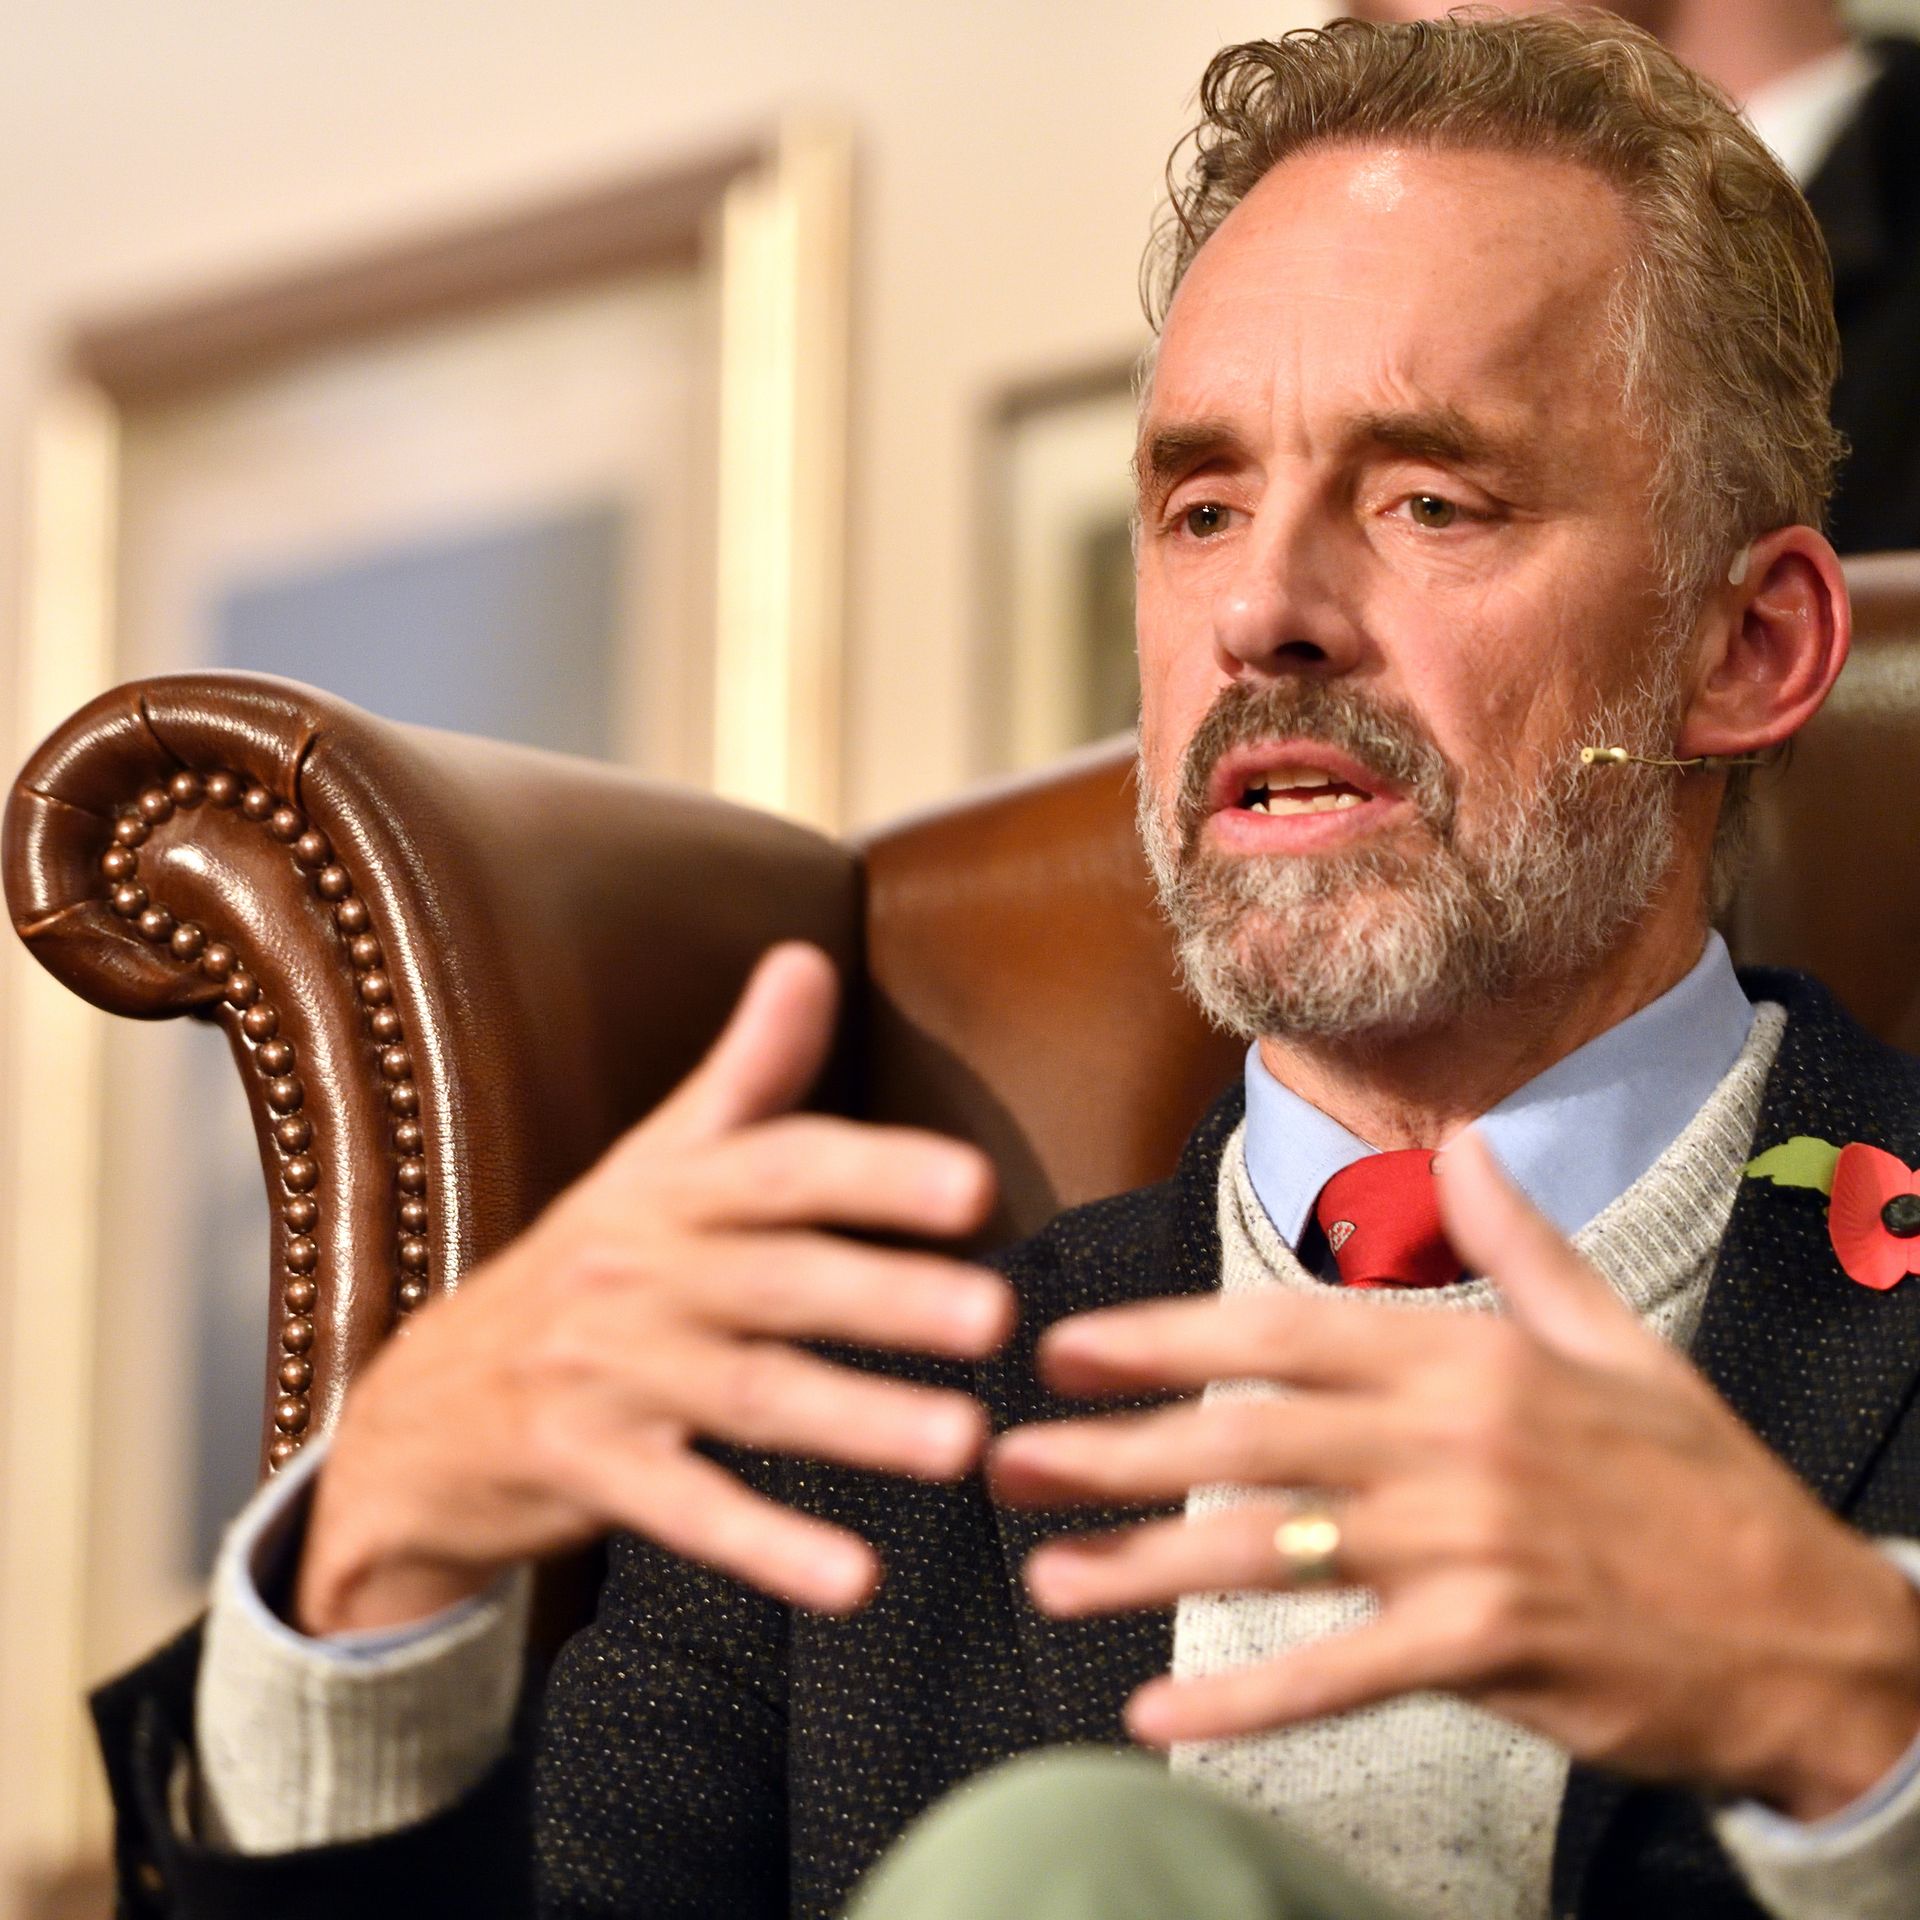 A photo of Jordan Peterson sitting in a chair